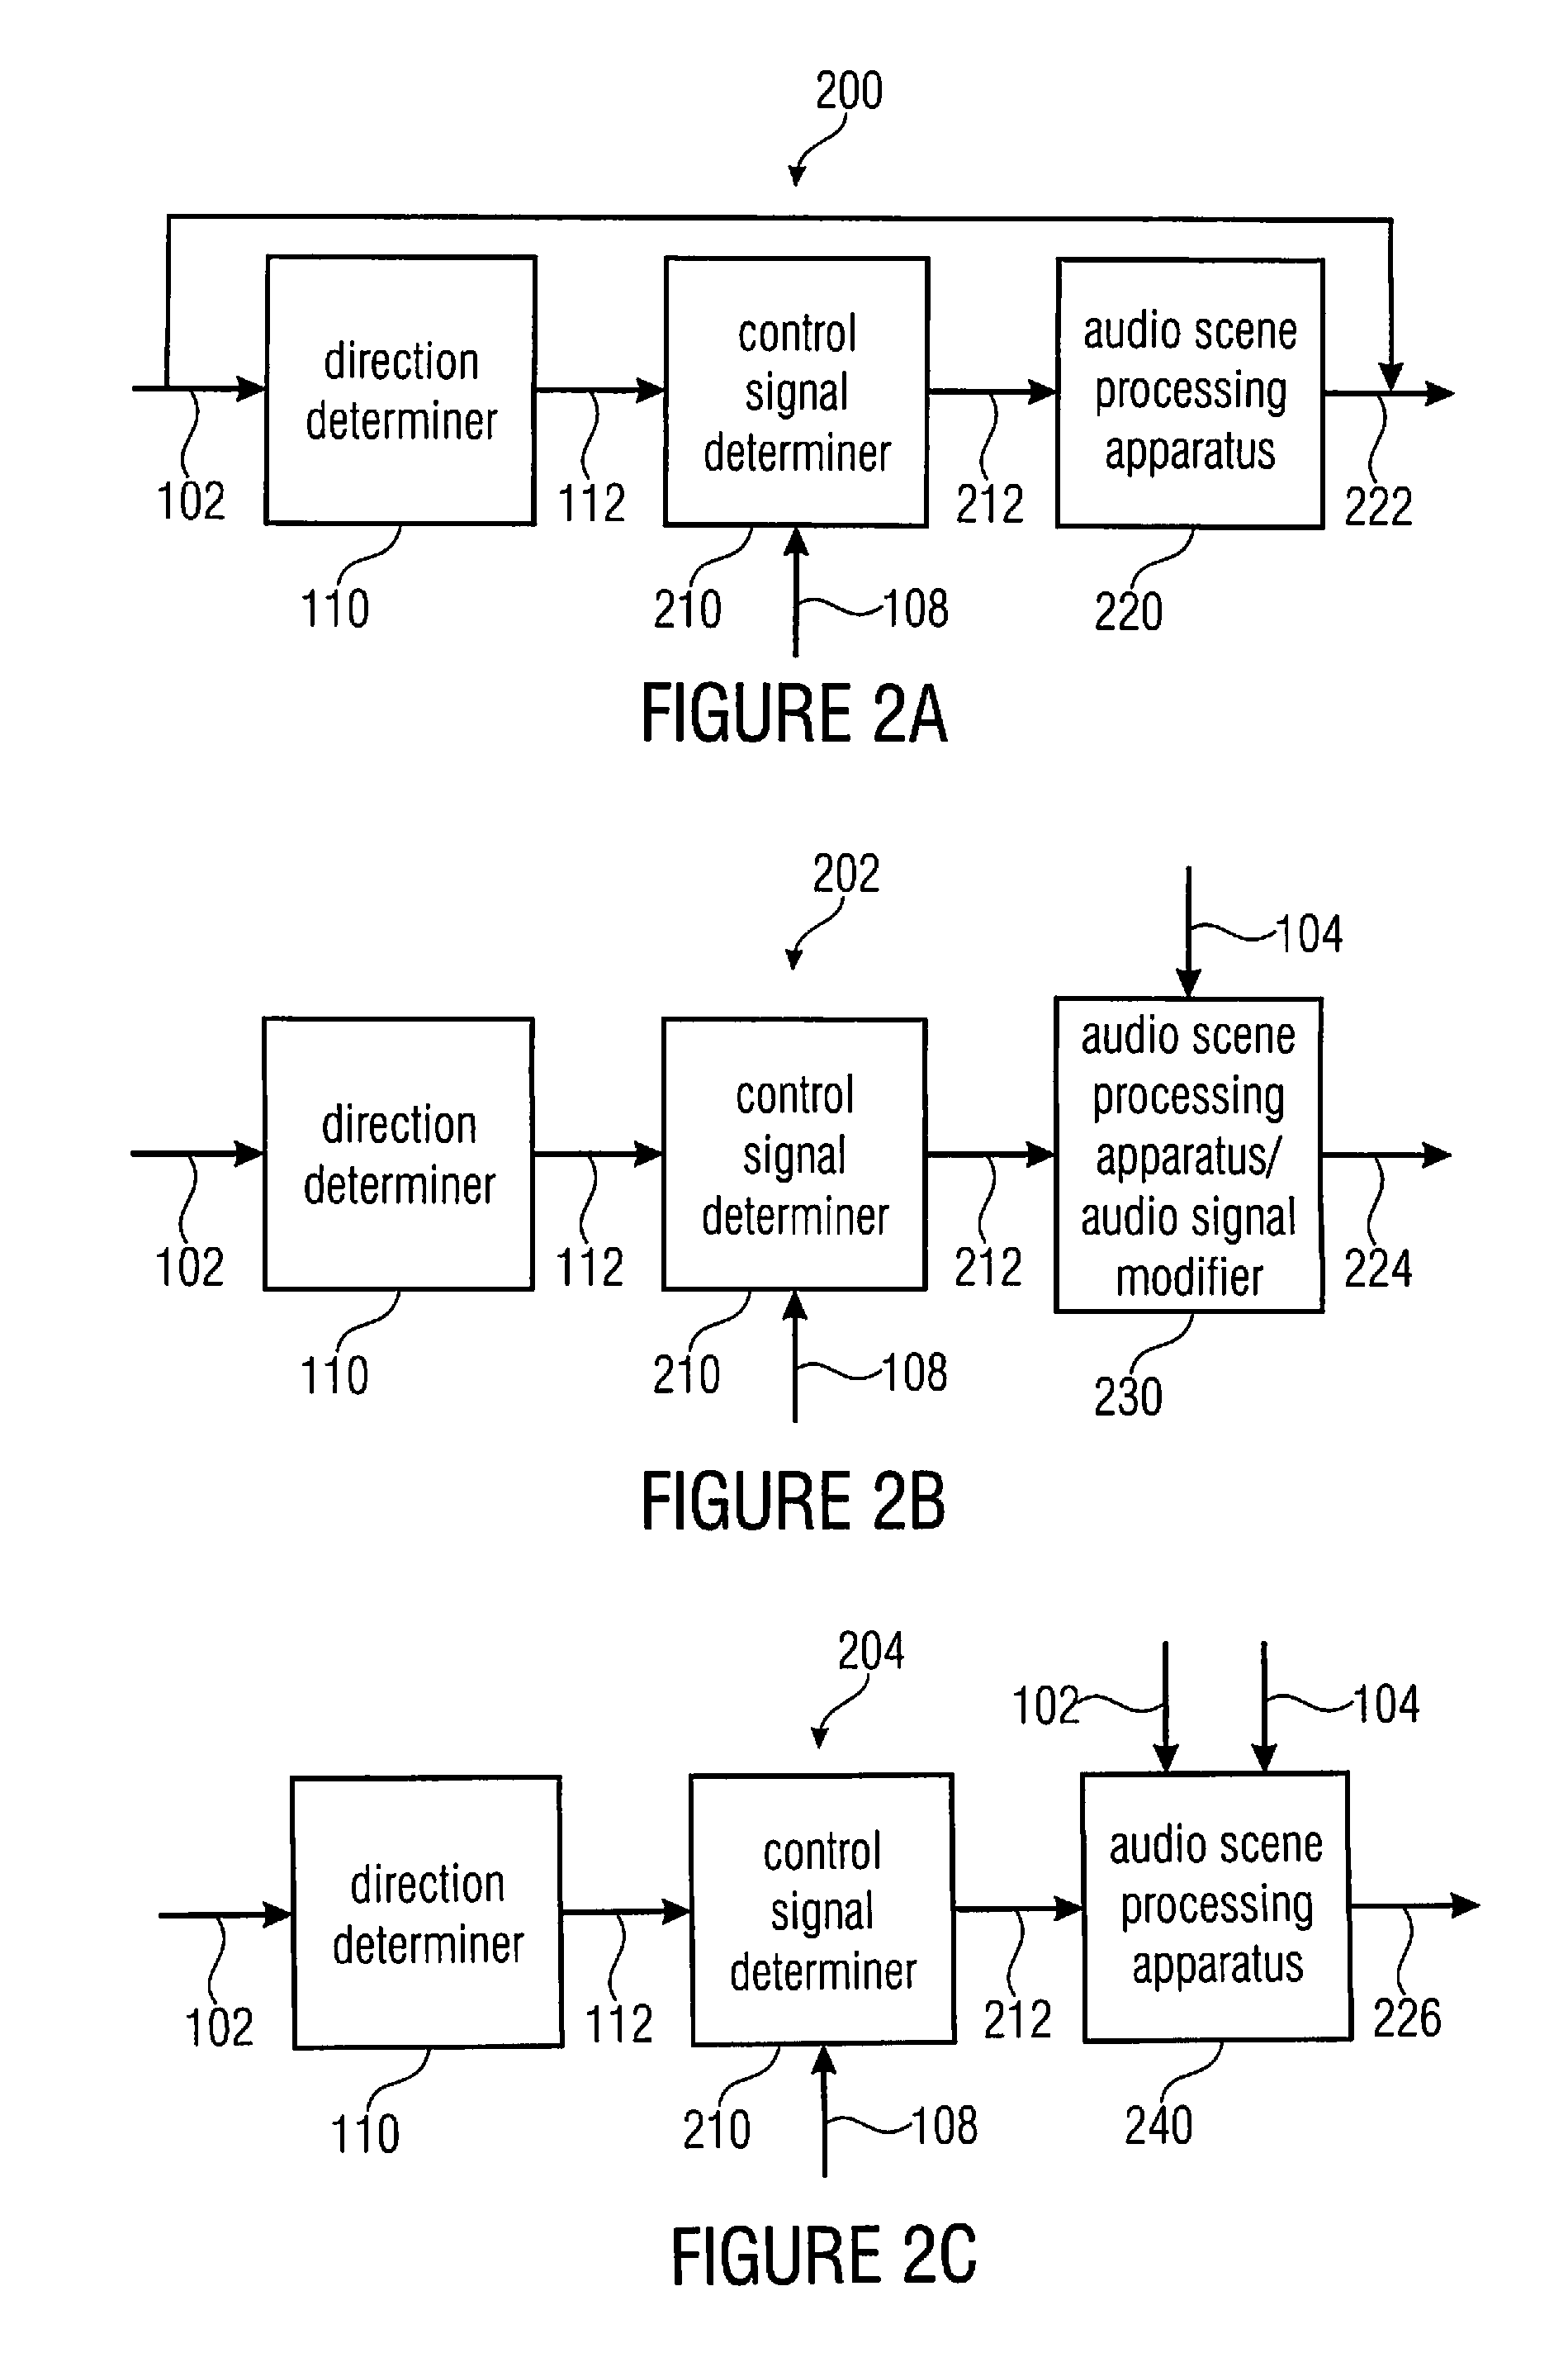 Apparatus for changing an audio scene and an apparatus for generating a directional function